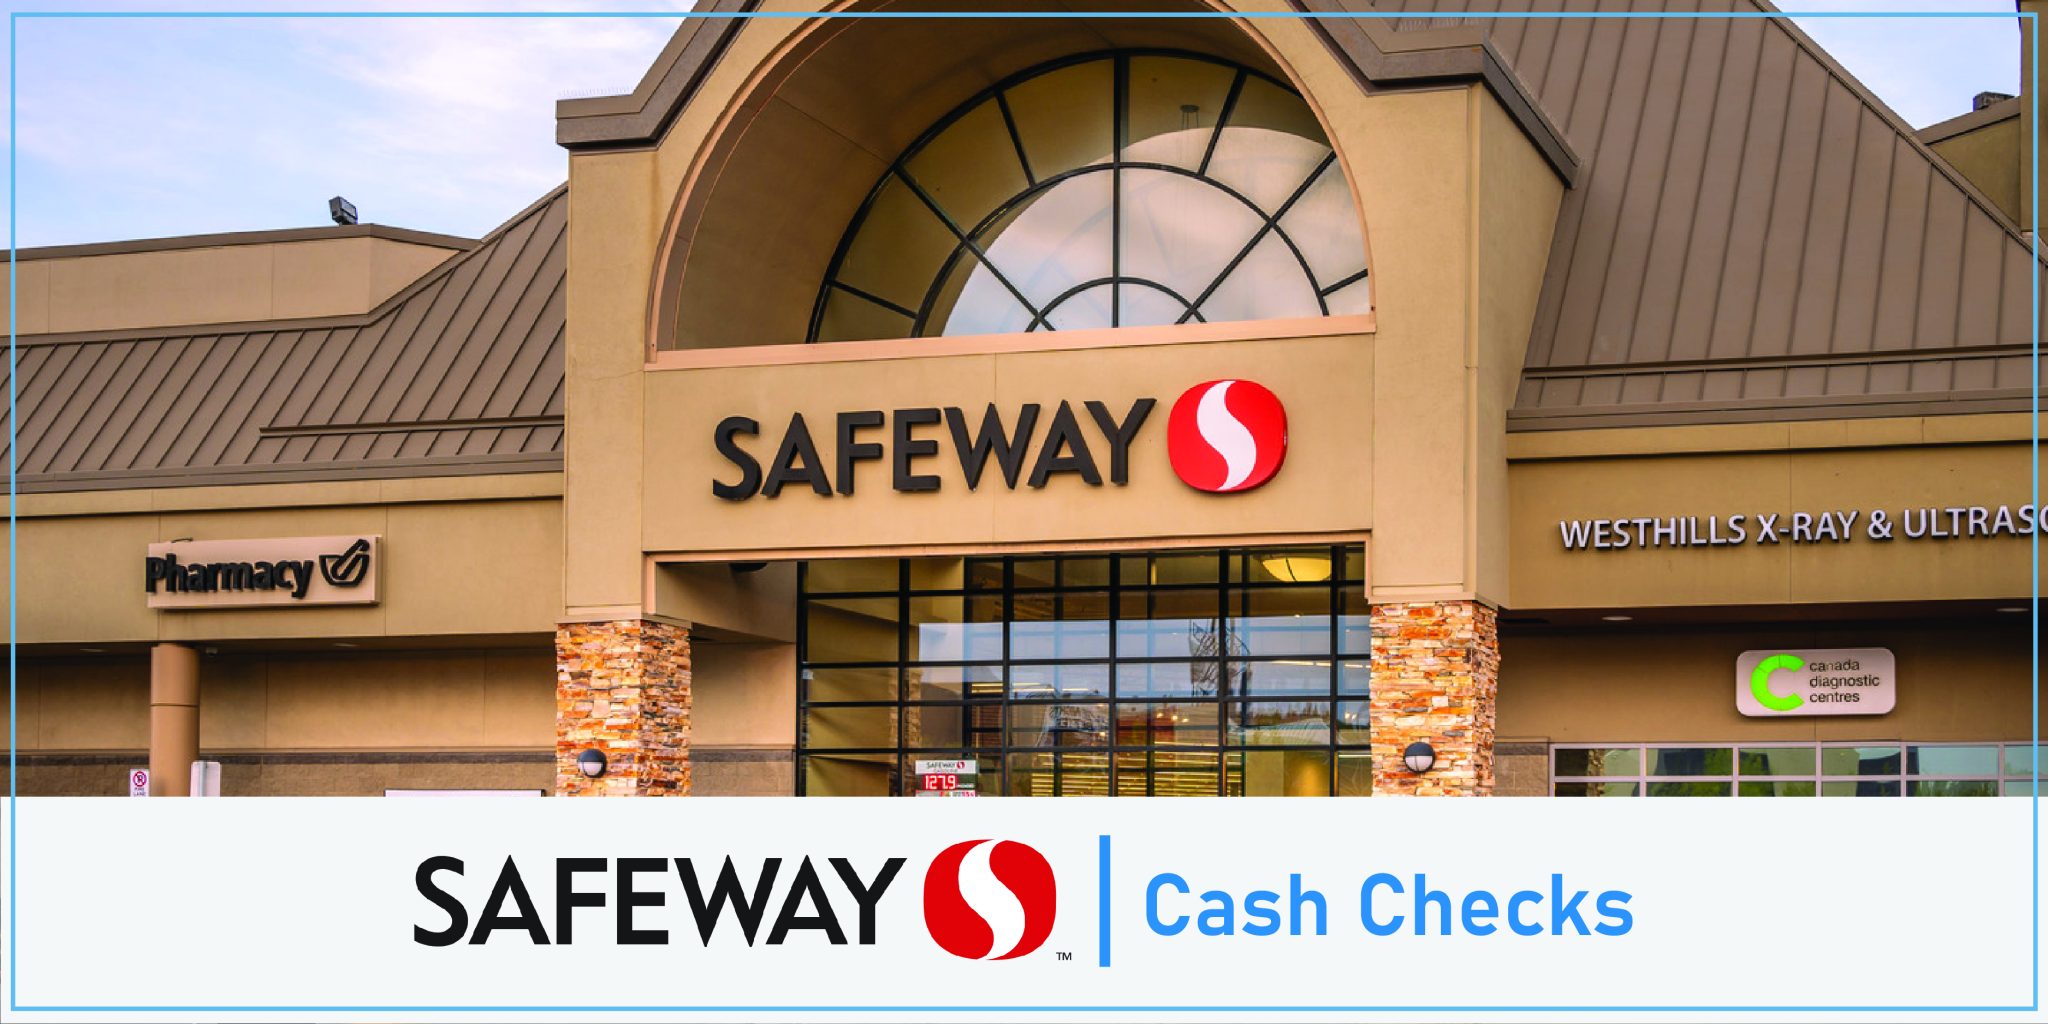 Does Safeway Cash Checks? Details for All Kind of Checks with Limitations